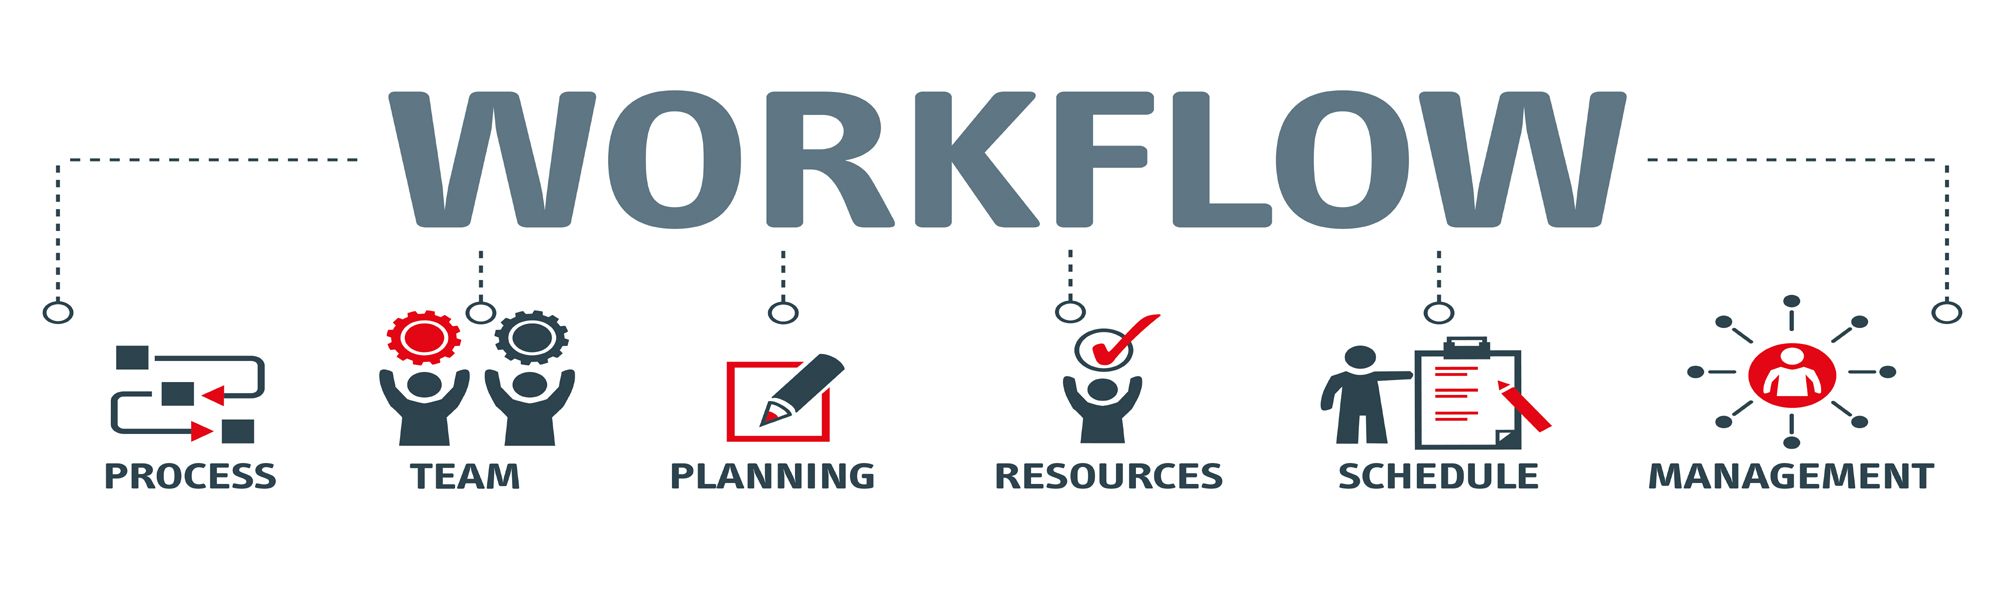 Workflow Management System, Efficiency, Automation, Productivity, Collaboration